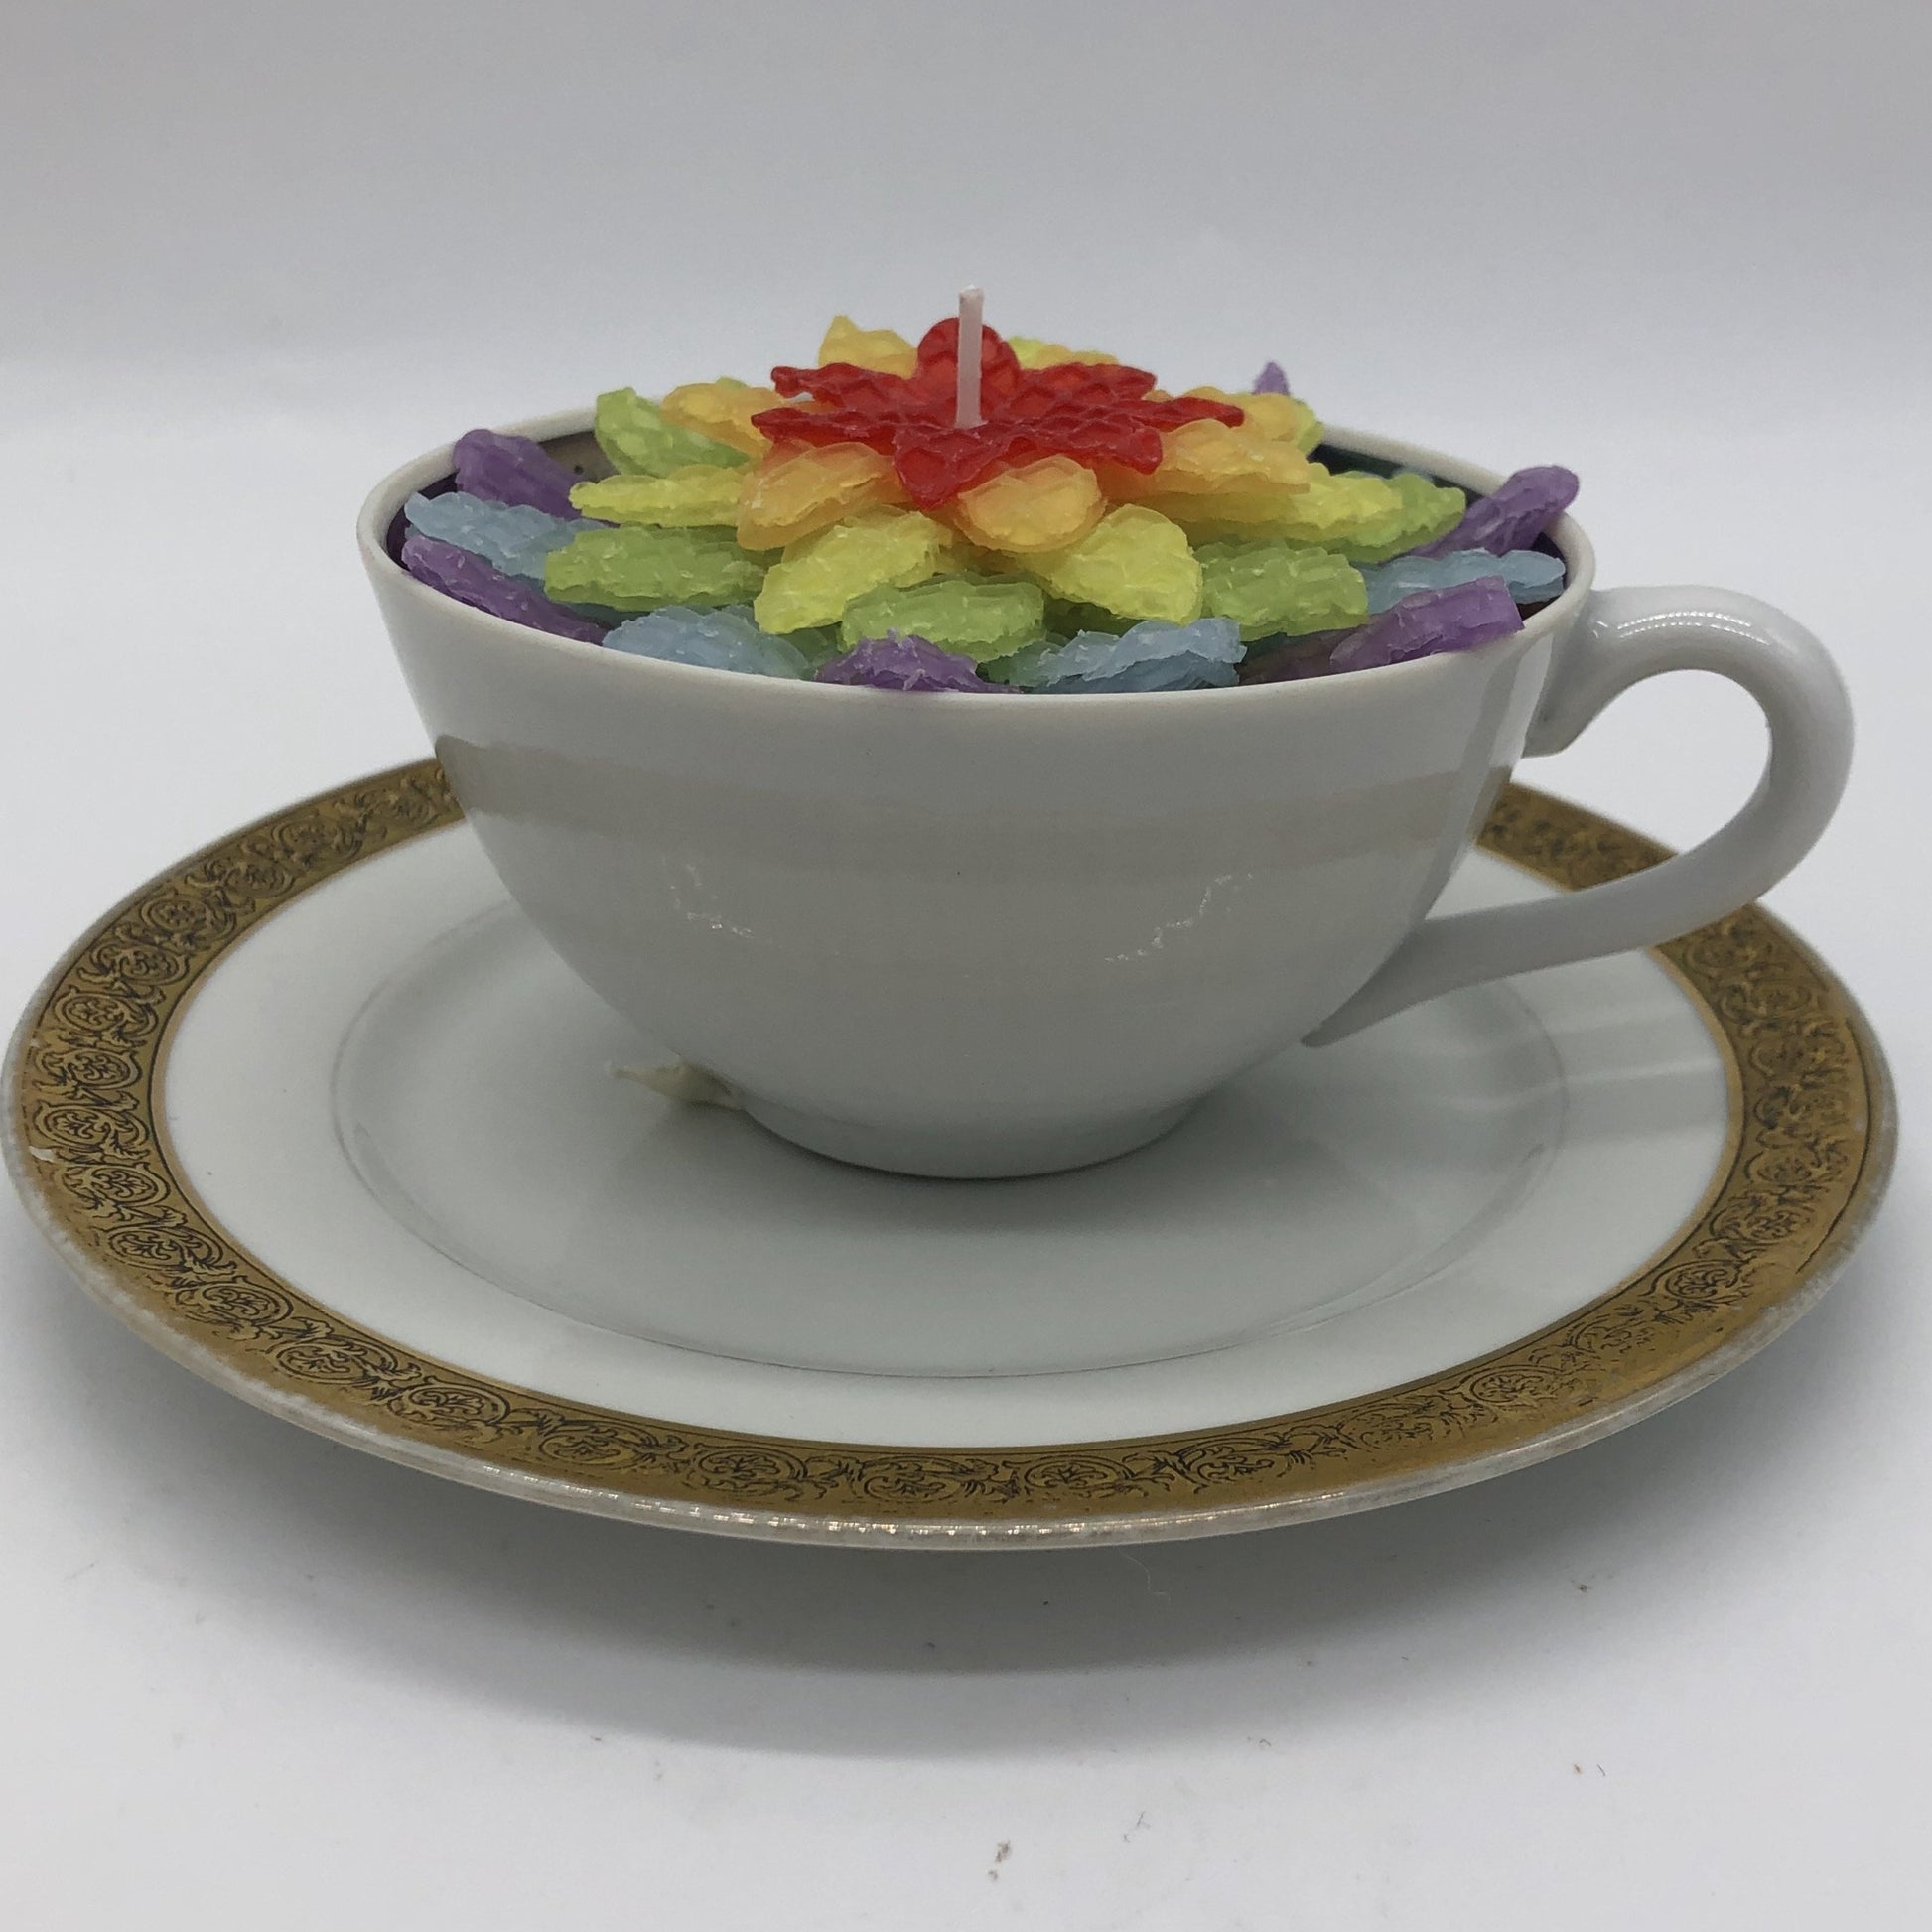 White teacup with white saucer with fancy gold border.  Inside teacup in a six layer flower in the colors of the rainbow.